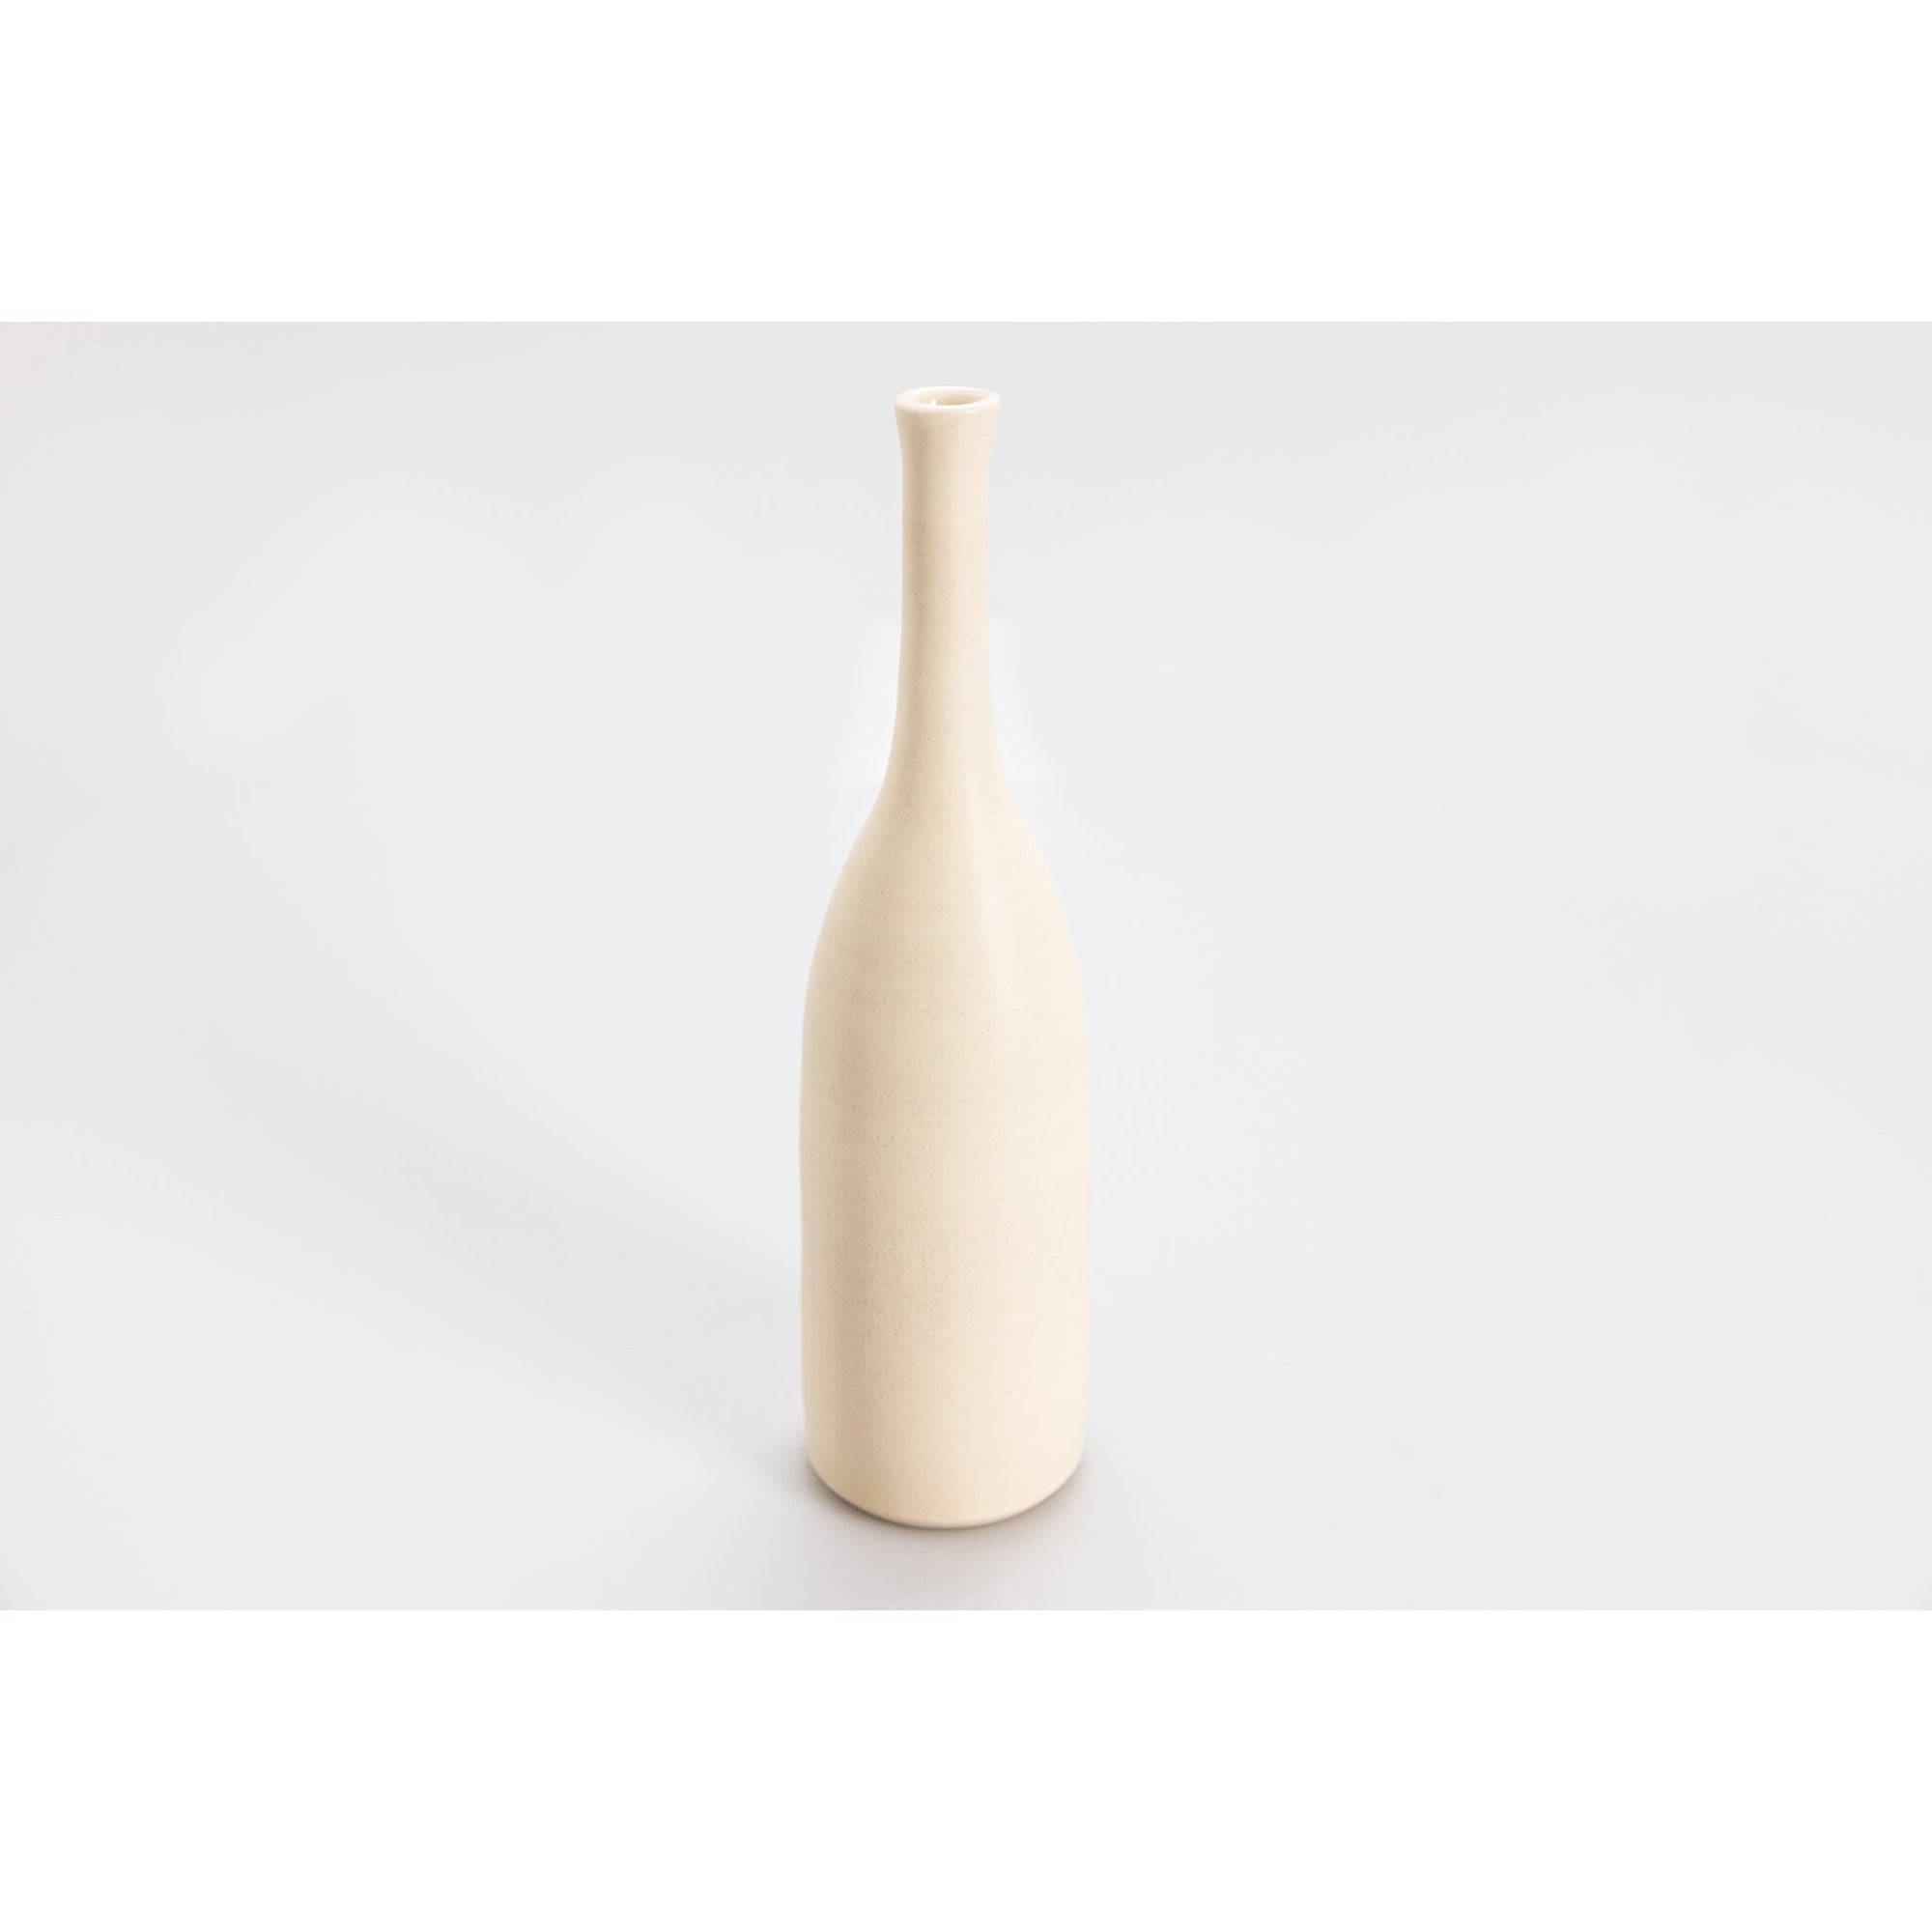 'LB140 Ivory Bottle' by Lucy Burley ceramics, available at Padstow Gallery, Cornwall